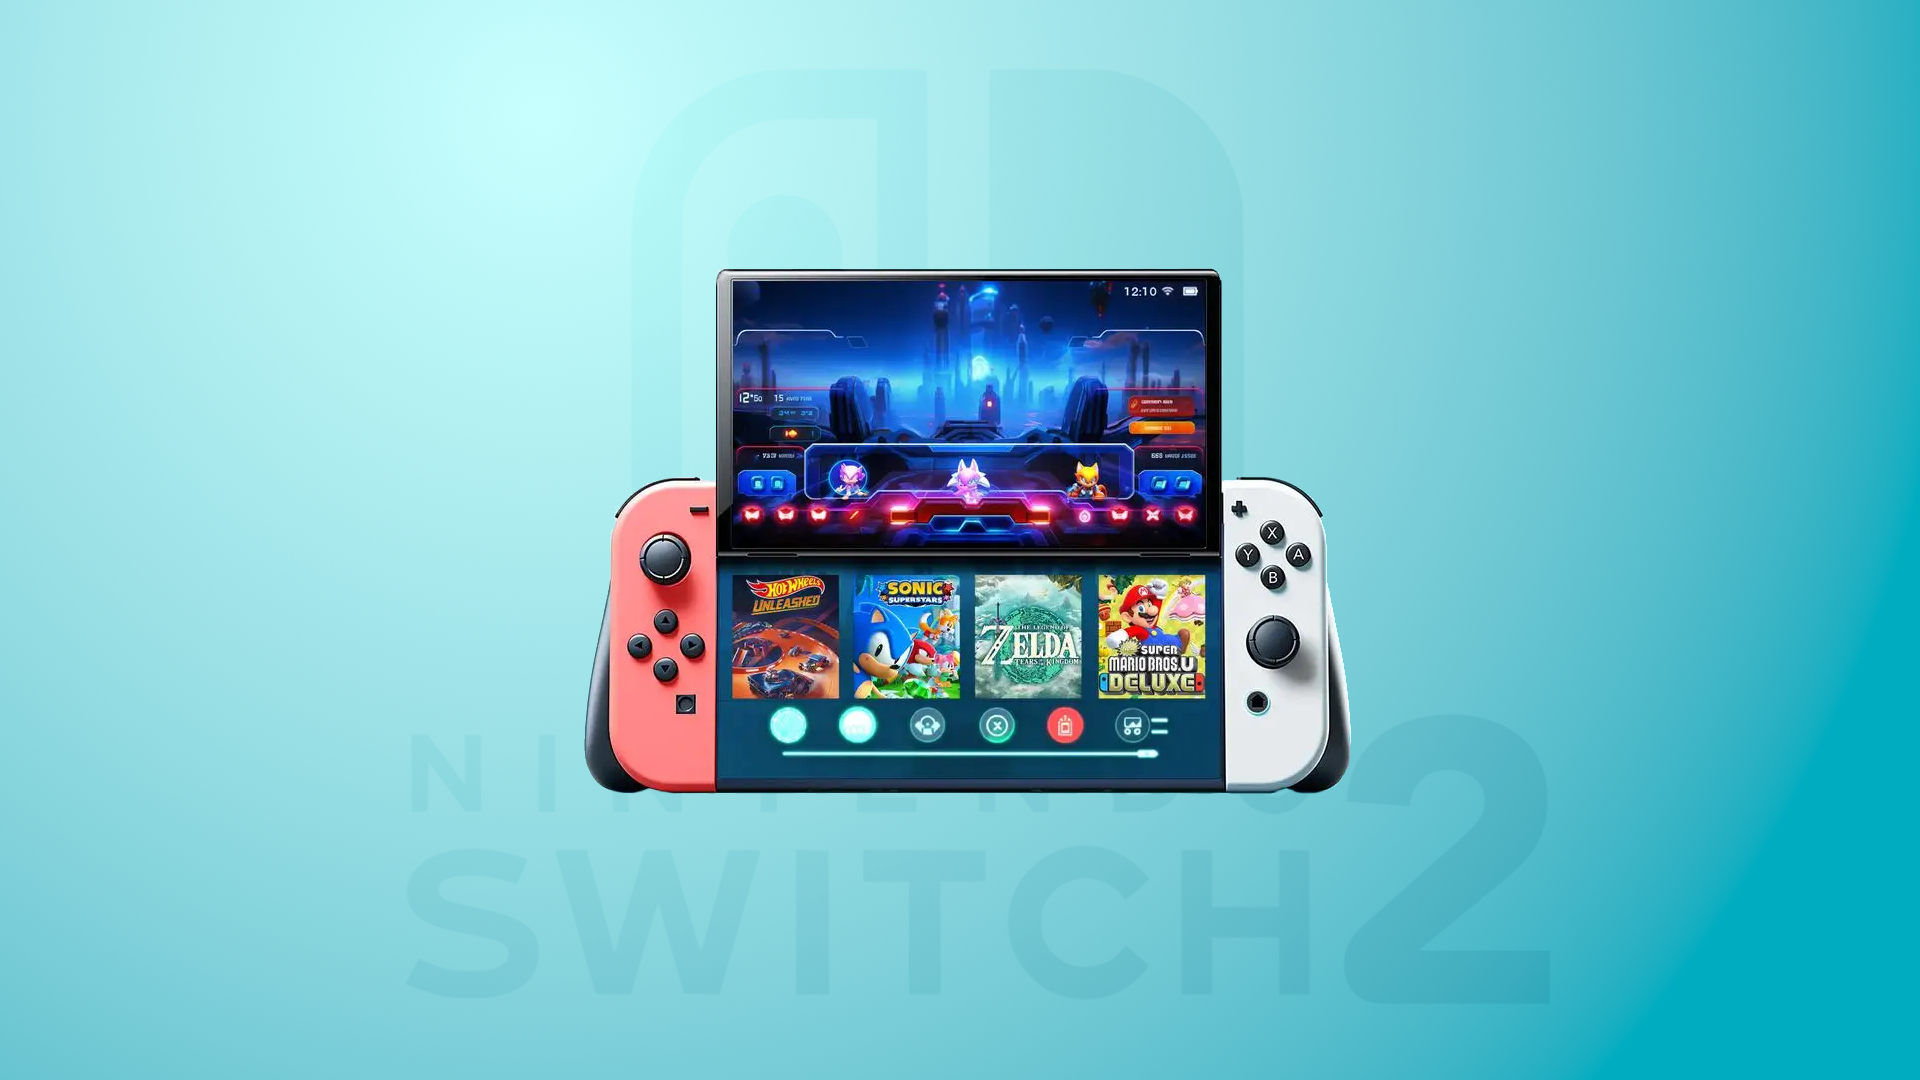 Nintendo Switch 2 rumors: Price, release date, possible games, and